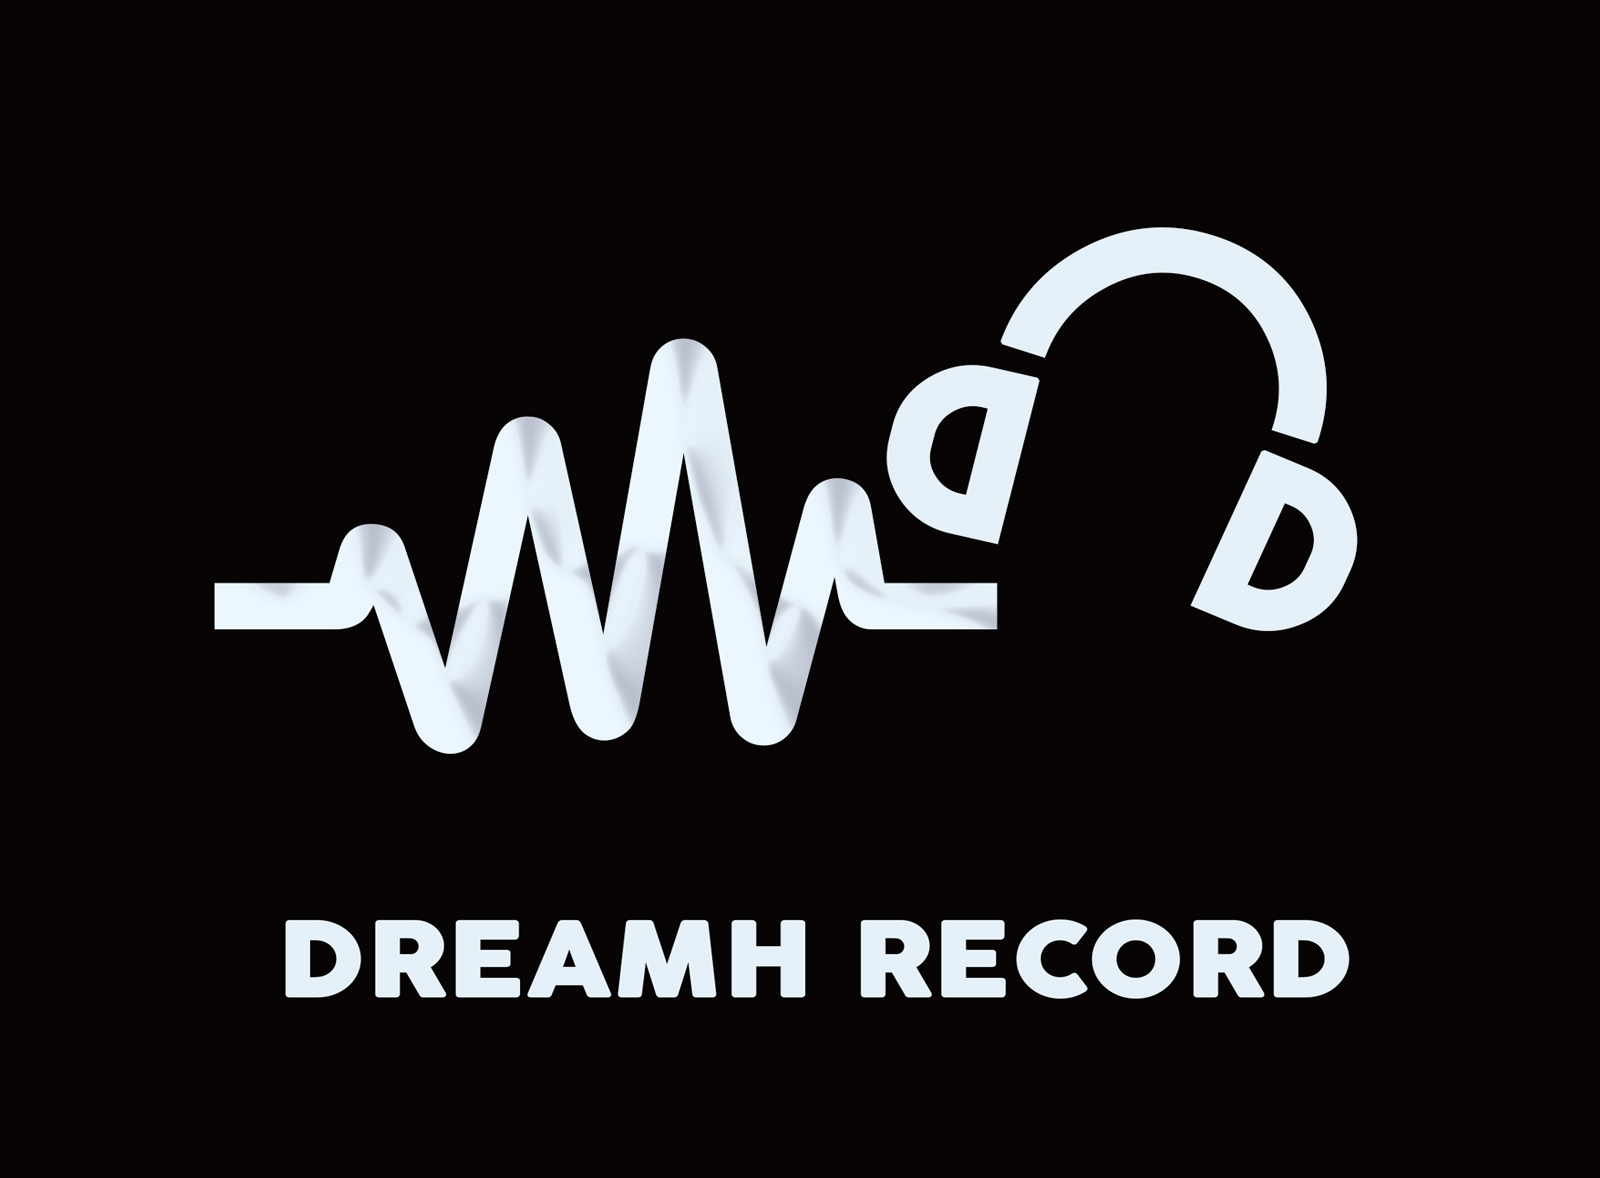 Dreamh Record